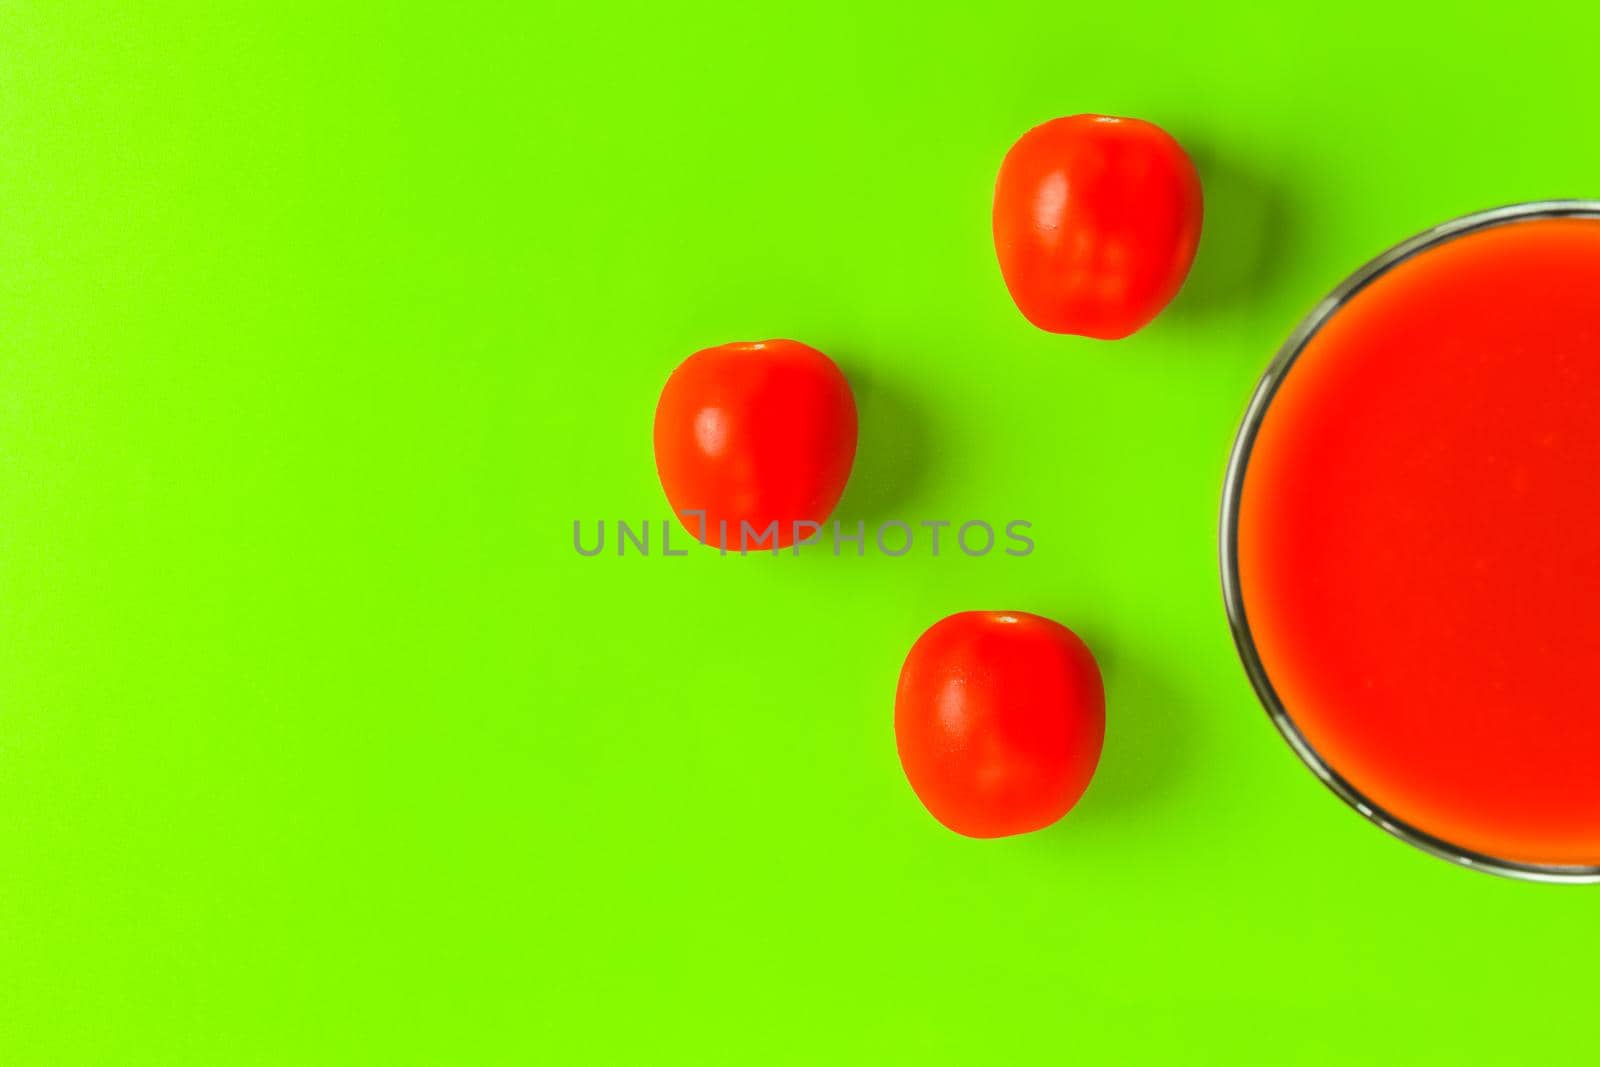 red tomato and a glass of tomato juice on a green background. hard shadow. isolate by roman112007